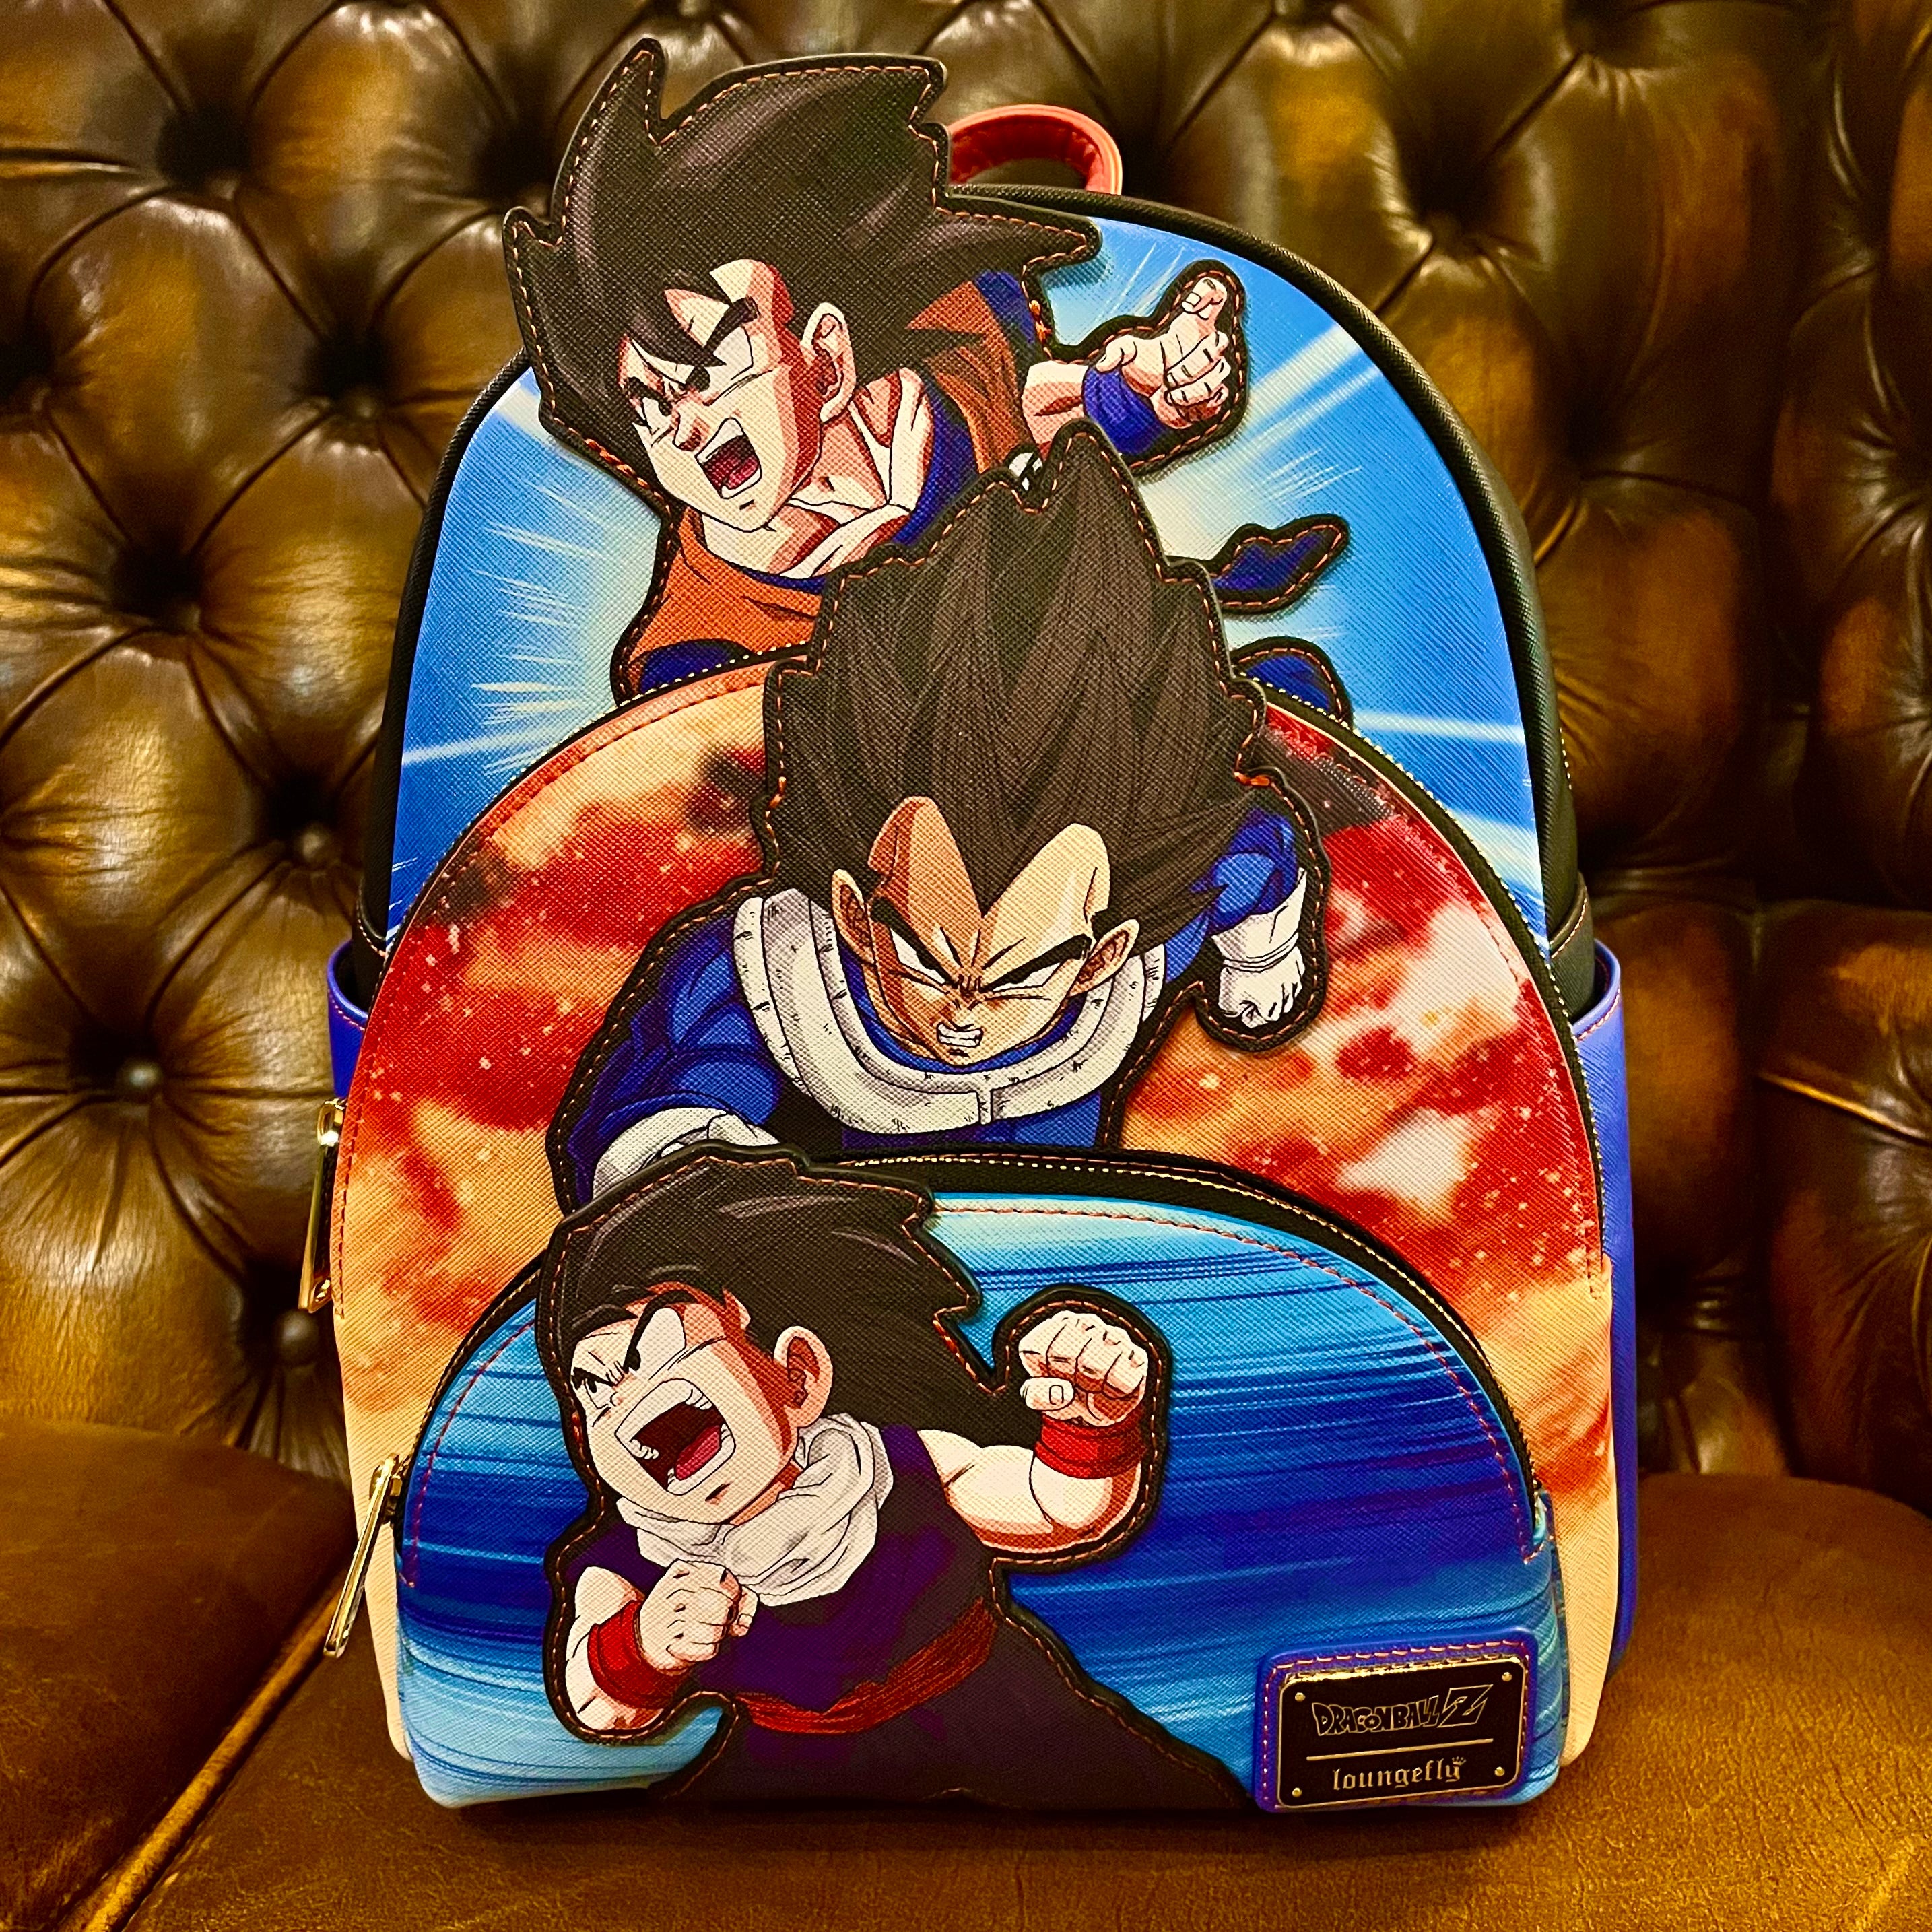 Dragon Ball Z Triple Pocket Mini Backpack by Loungefly